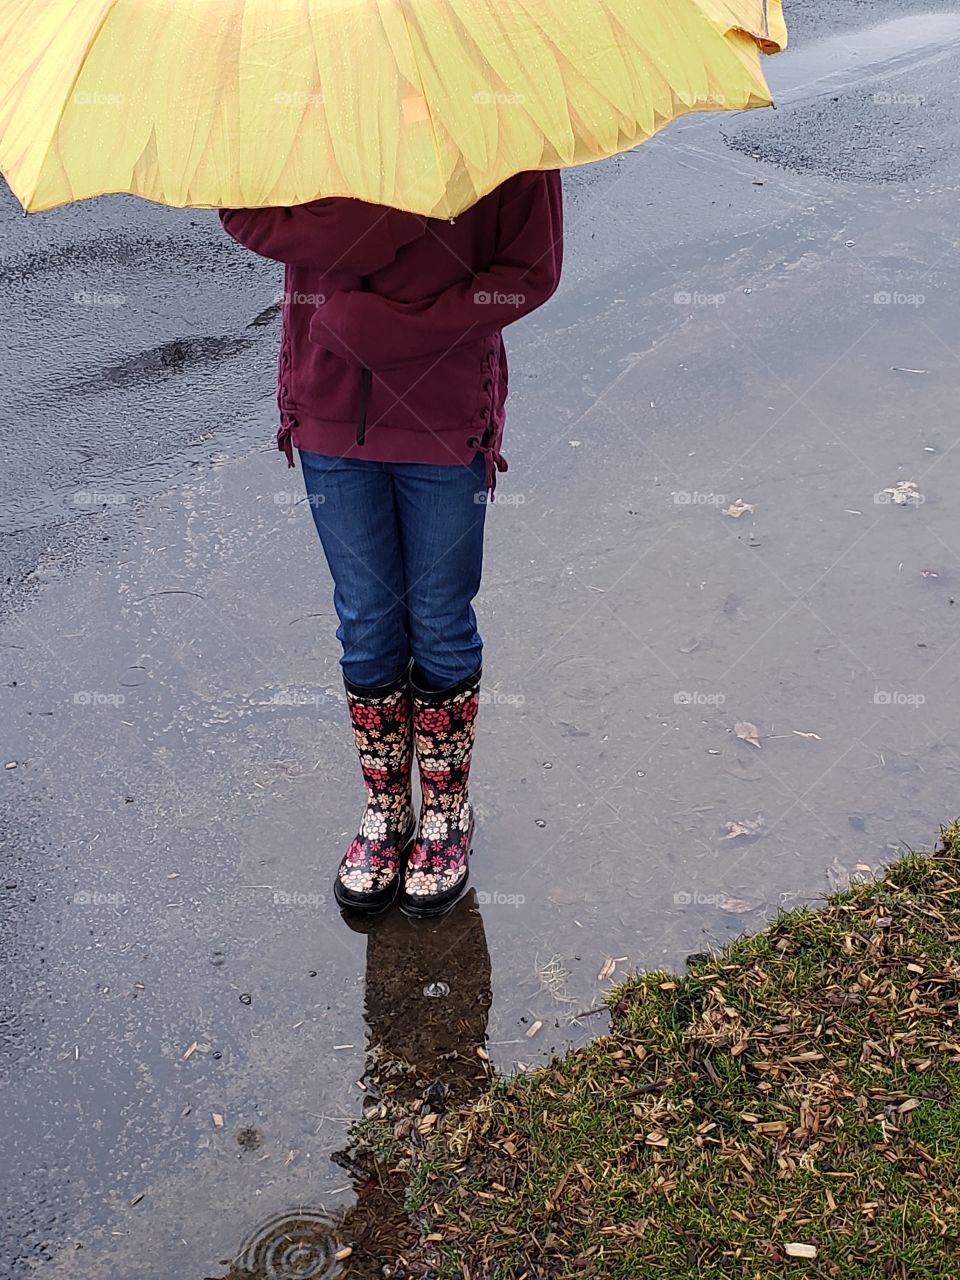 Rain boots in a puddle